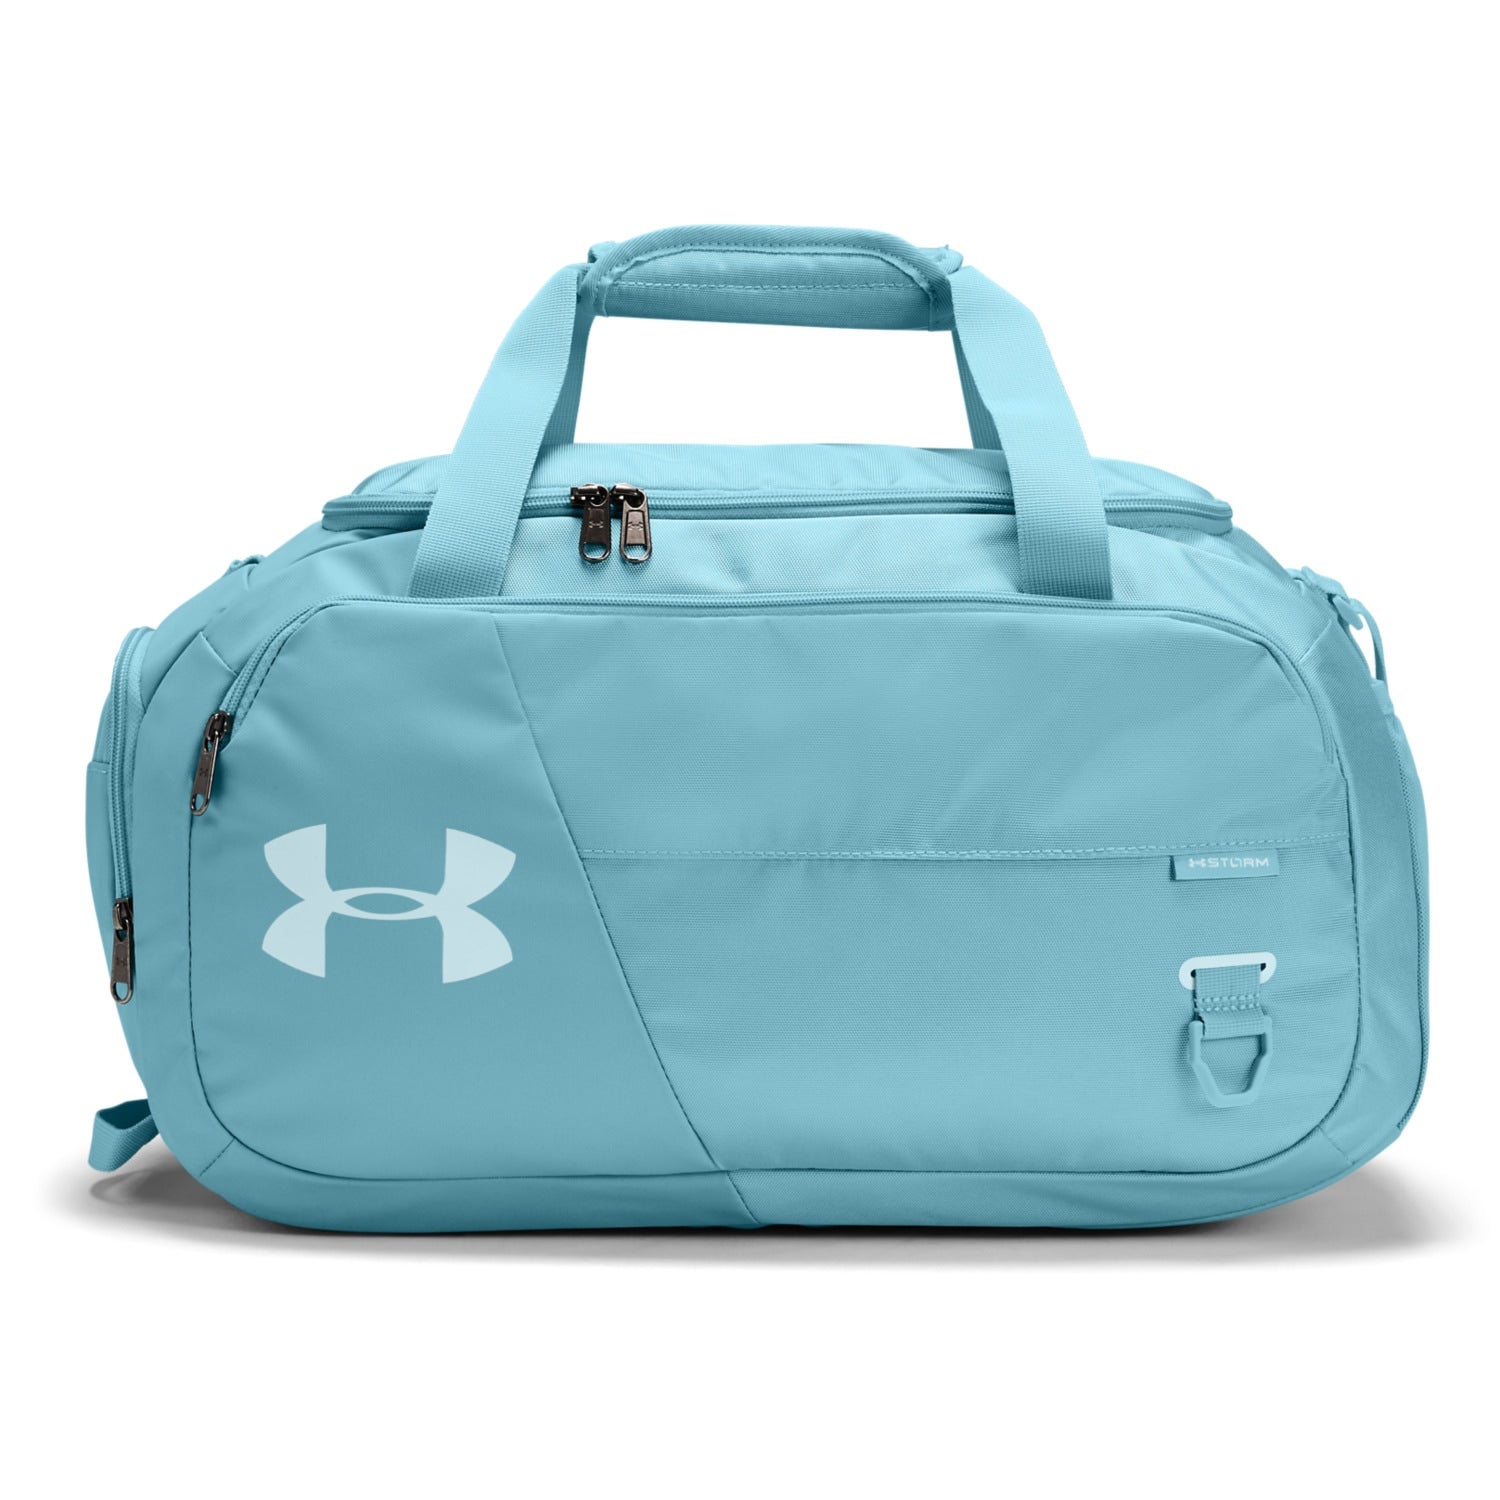 top gym bags for women